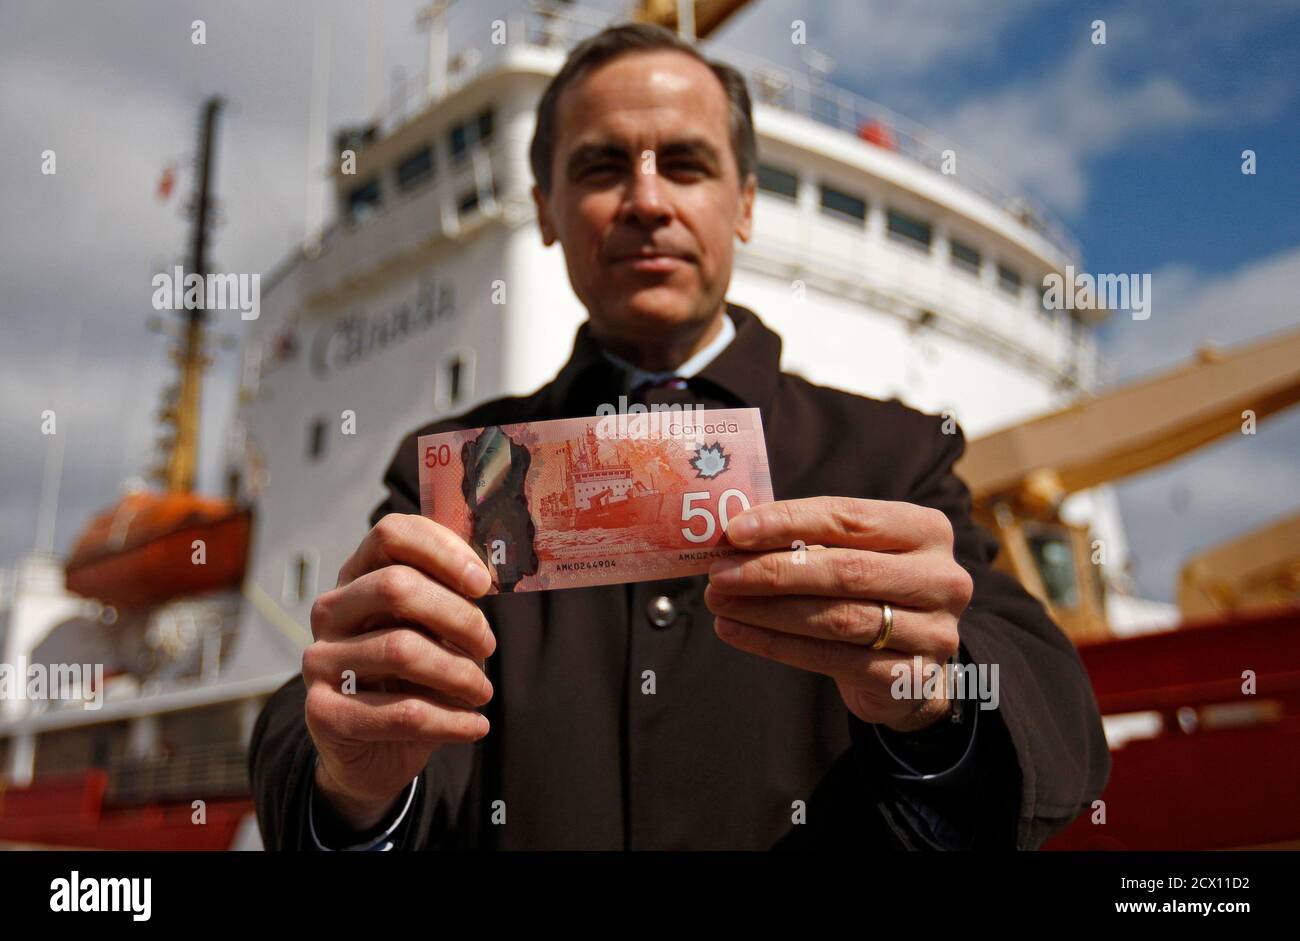 Bank of Canada Governor Mark Carney presents the new Canadian 50 dollar bill, made of polymer, in front of the CCGS Amundsen, the Arctic research vessel depicted on the back of the new bill, in Quebec City, March 26, 2012. REUTERS/Mathieu Belanger (CANADA - Tags: BUSINESS) Stock Photo